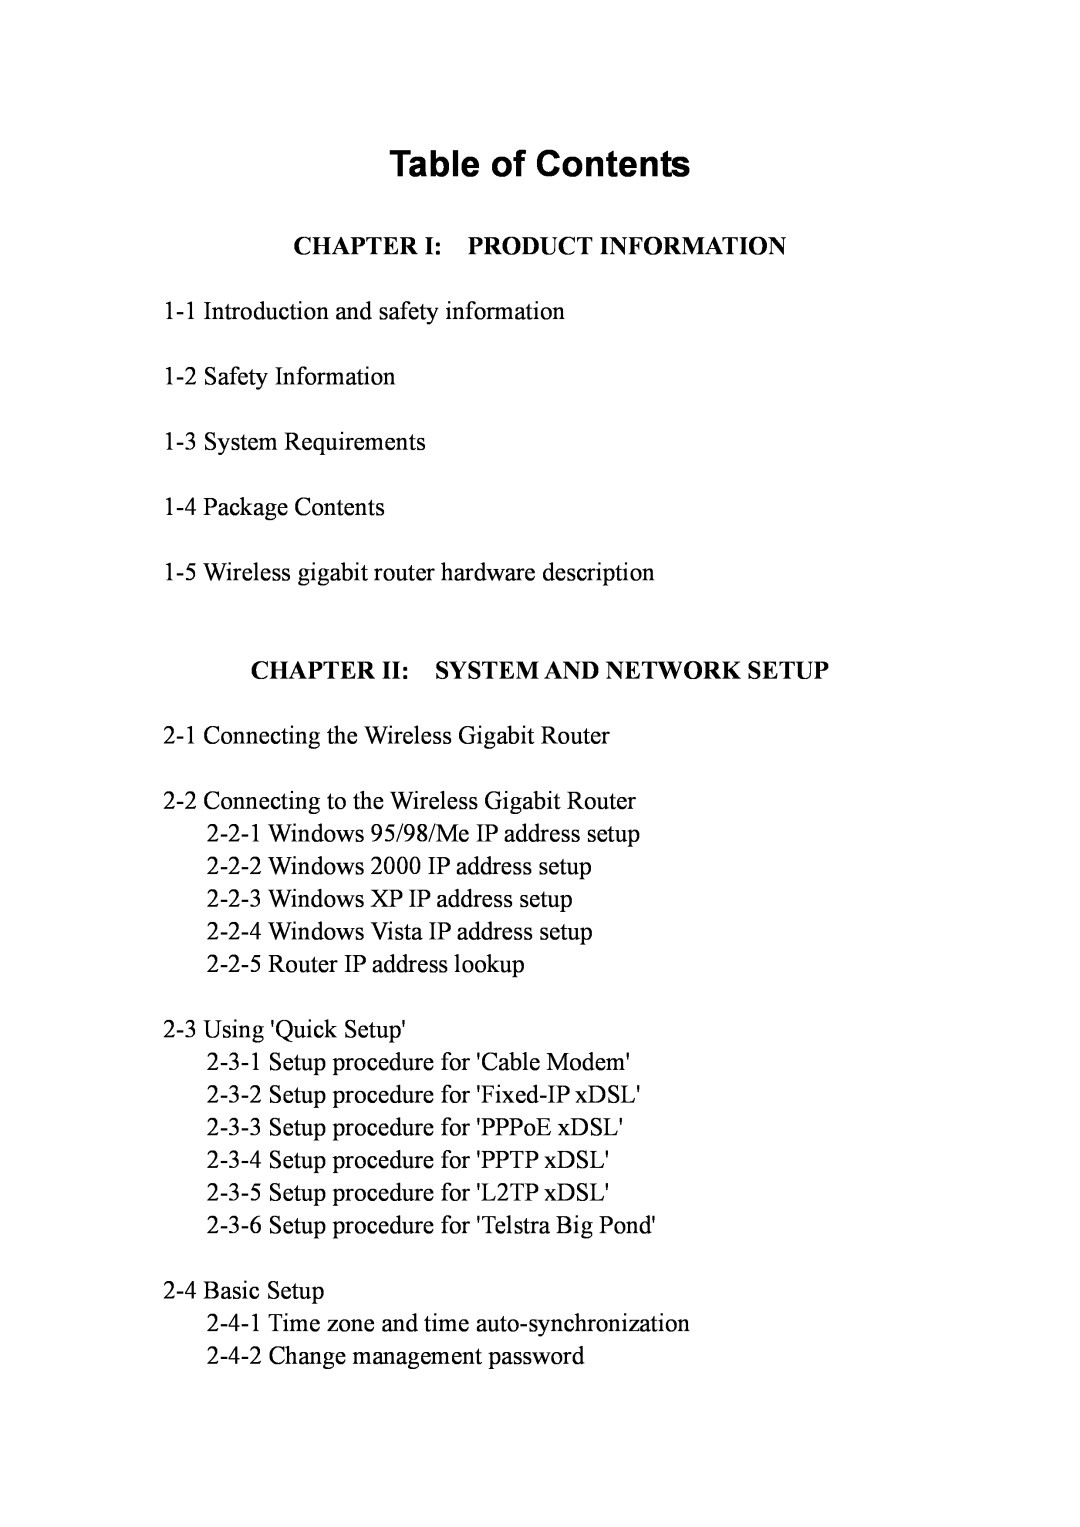 Intellinet Network Solutions INT-524315-UM-0808-1 Chapter I Product Information, Chapter Ii System And Network Setup 